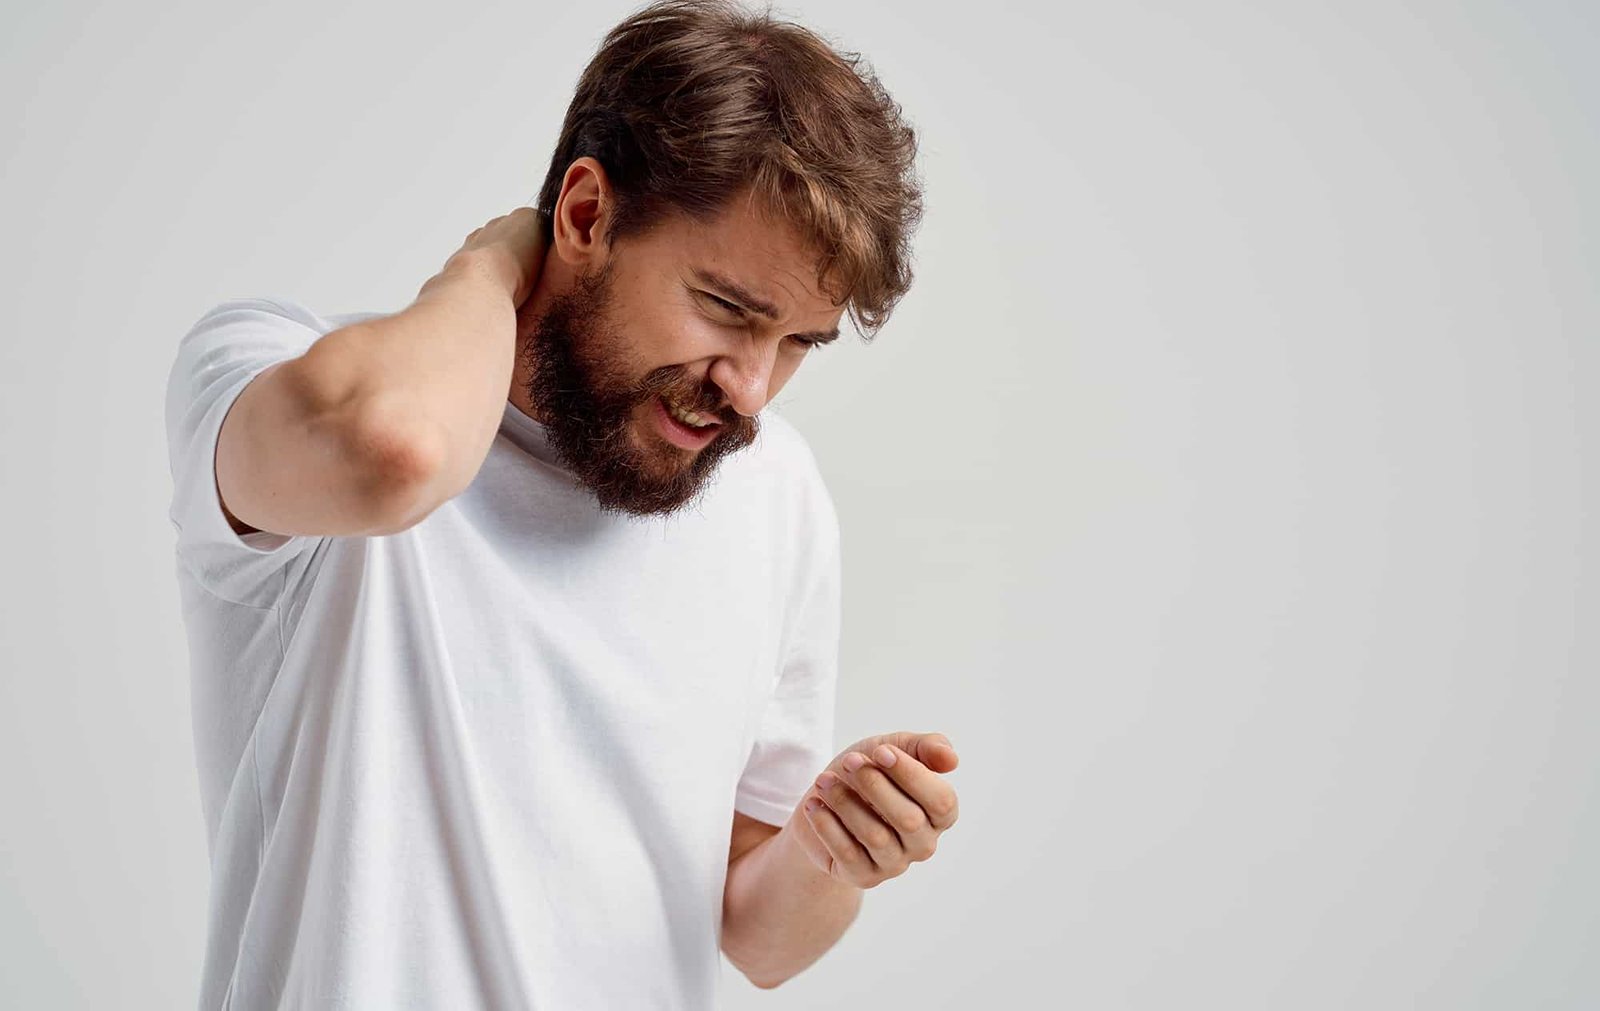 neck pain | Delray Disc and Spine | Dr. Louis Miller